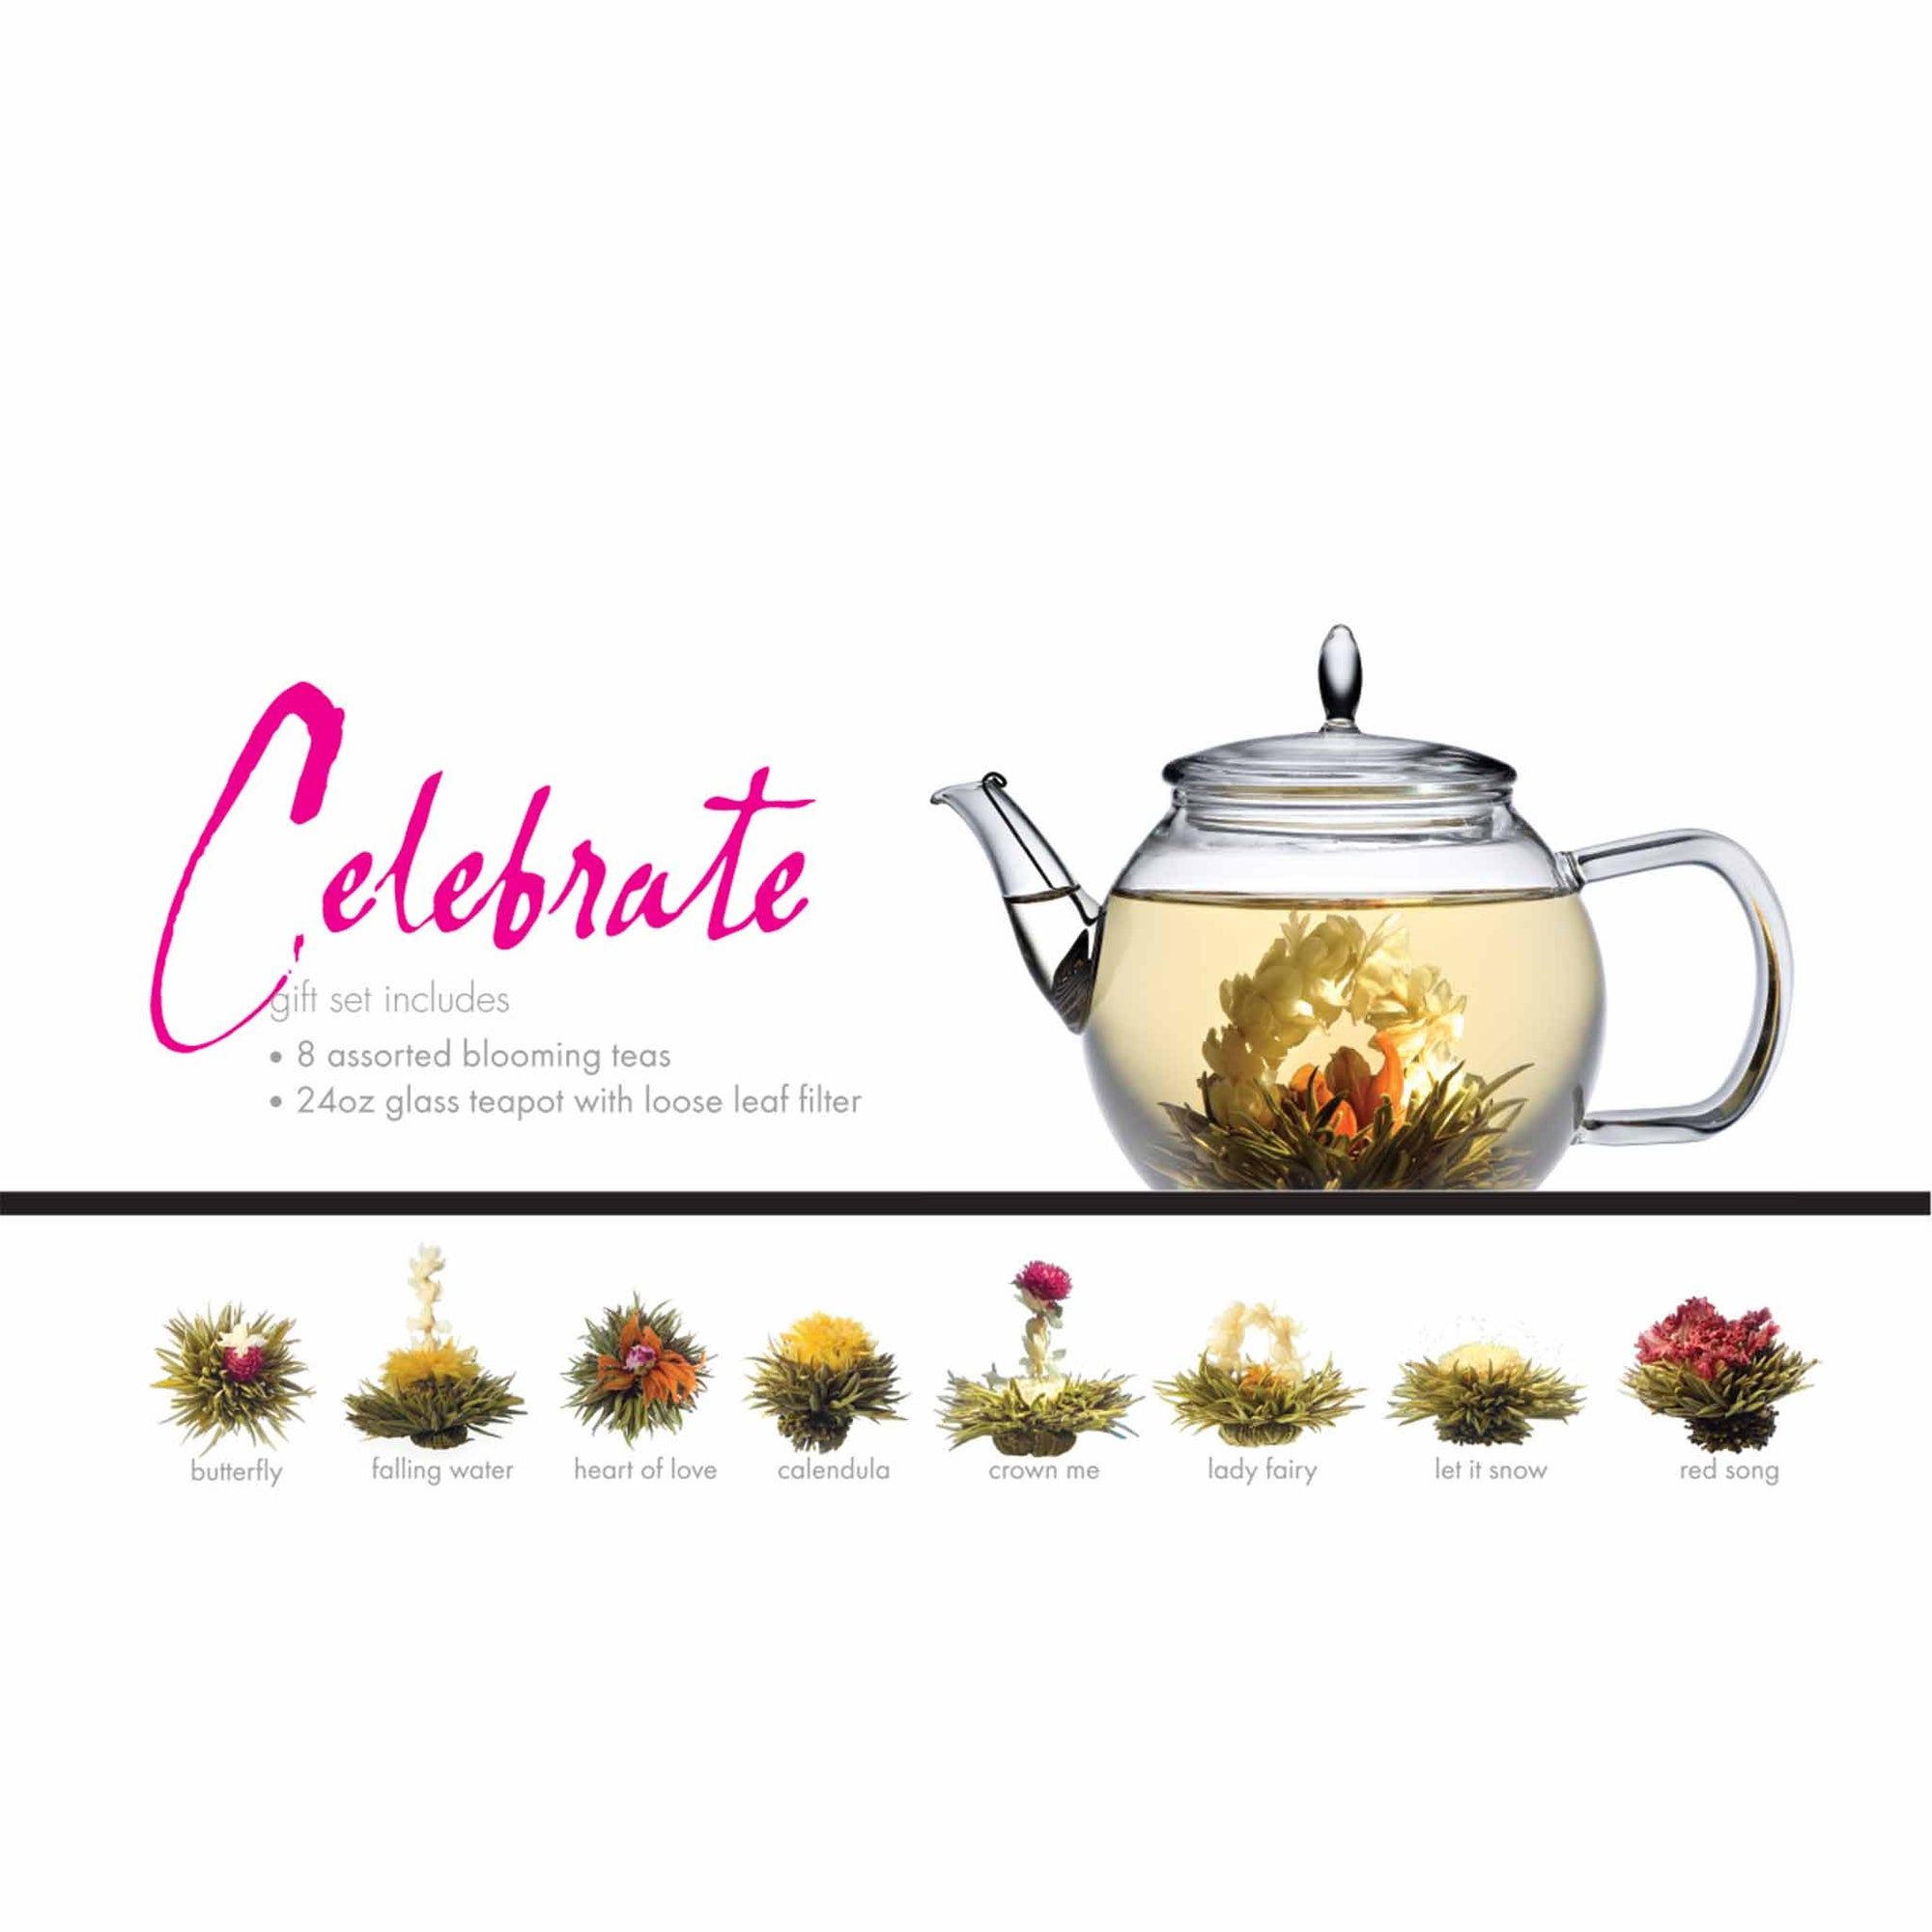 Teaposy celebrate posy gift set with 8 unique blooming teas in a 24oz glass teapot